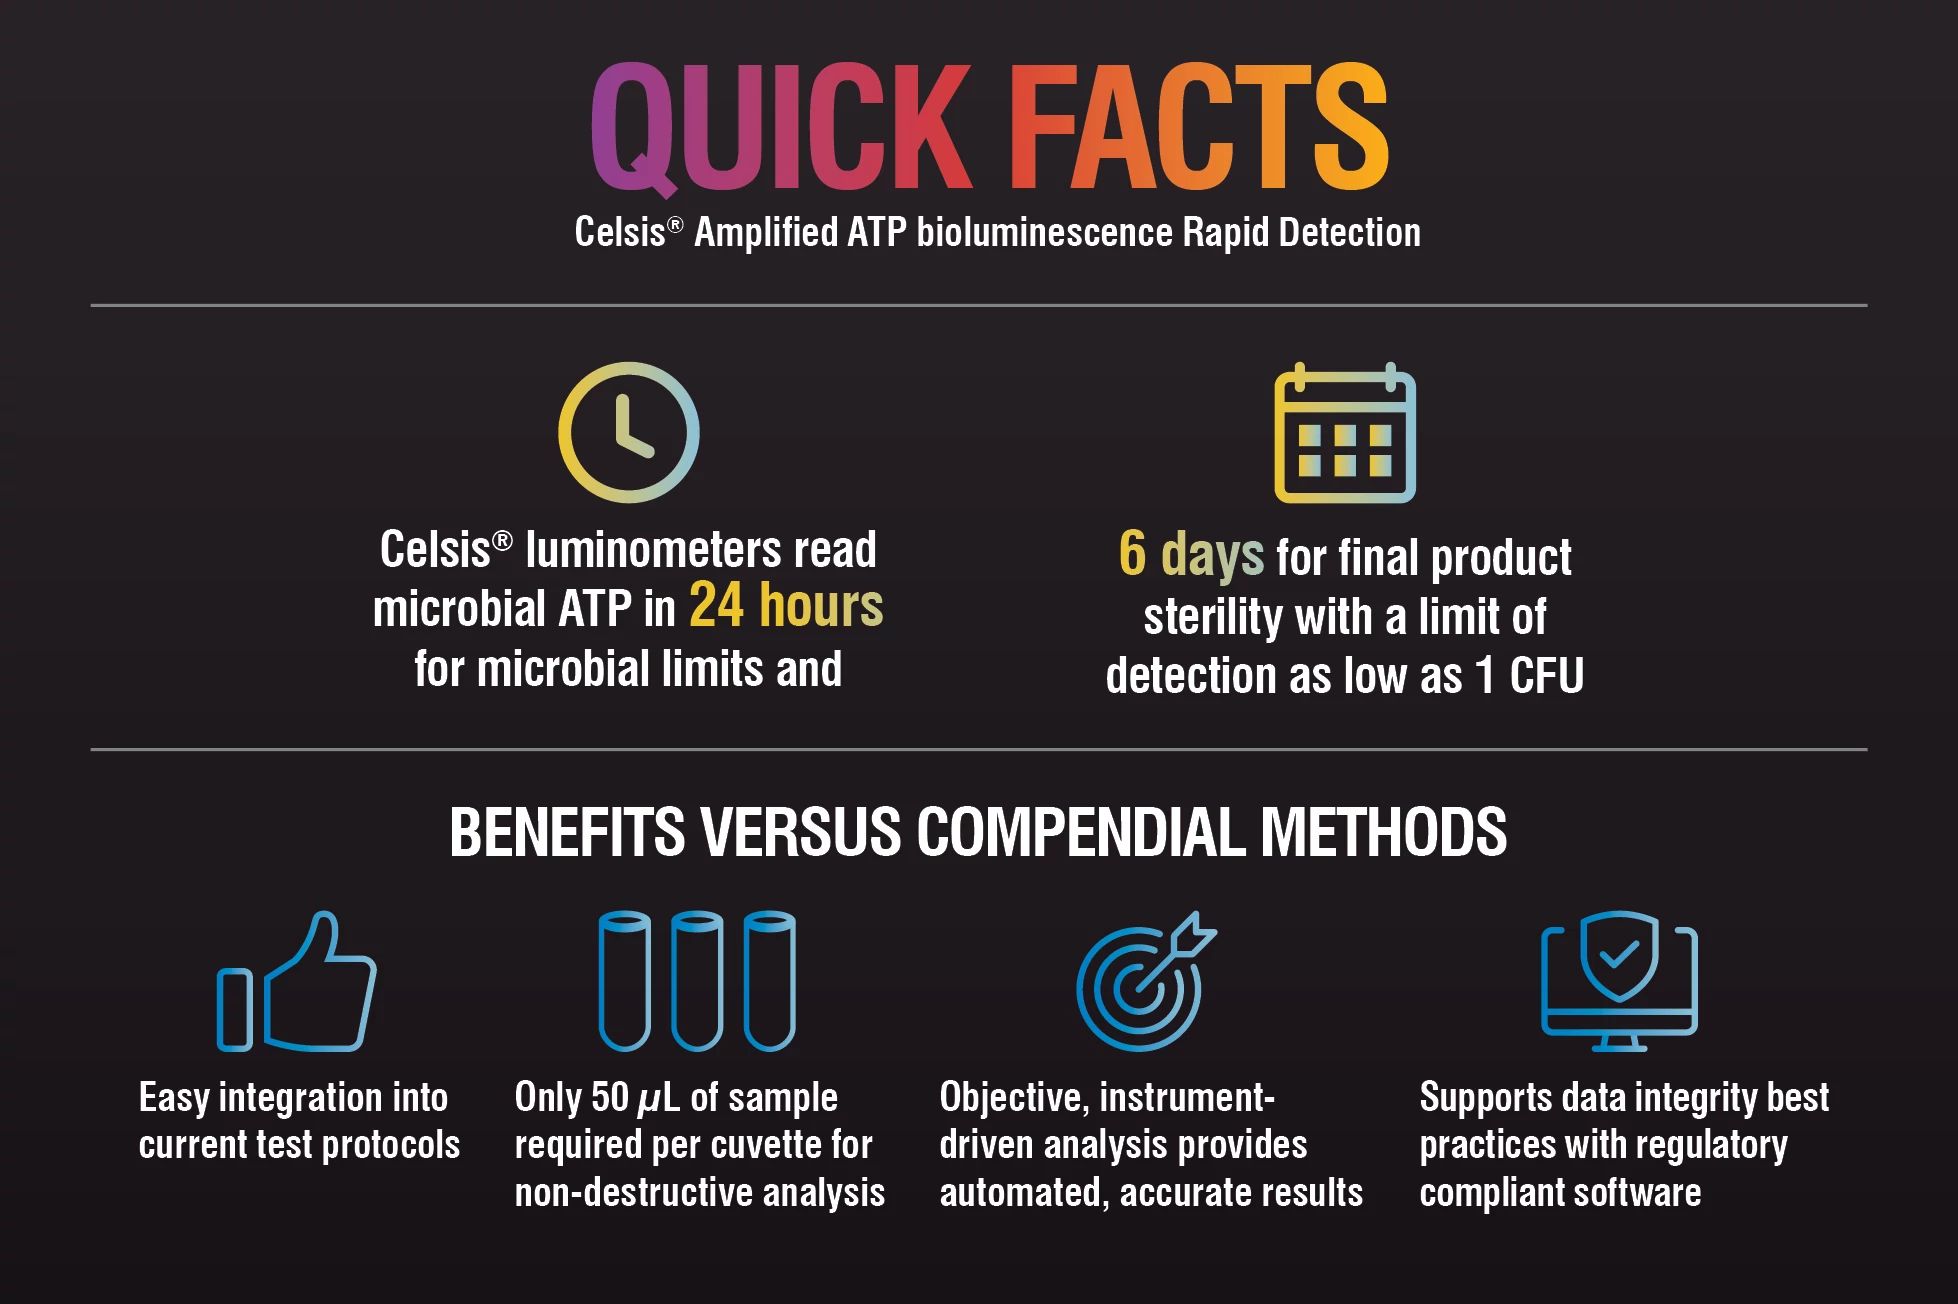 MS-2021-Celsis-Quick-Facts-Infographic-Preview.jpeg